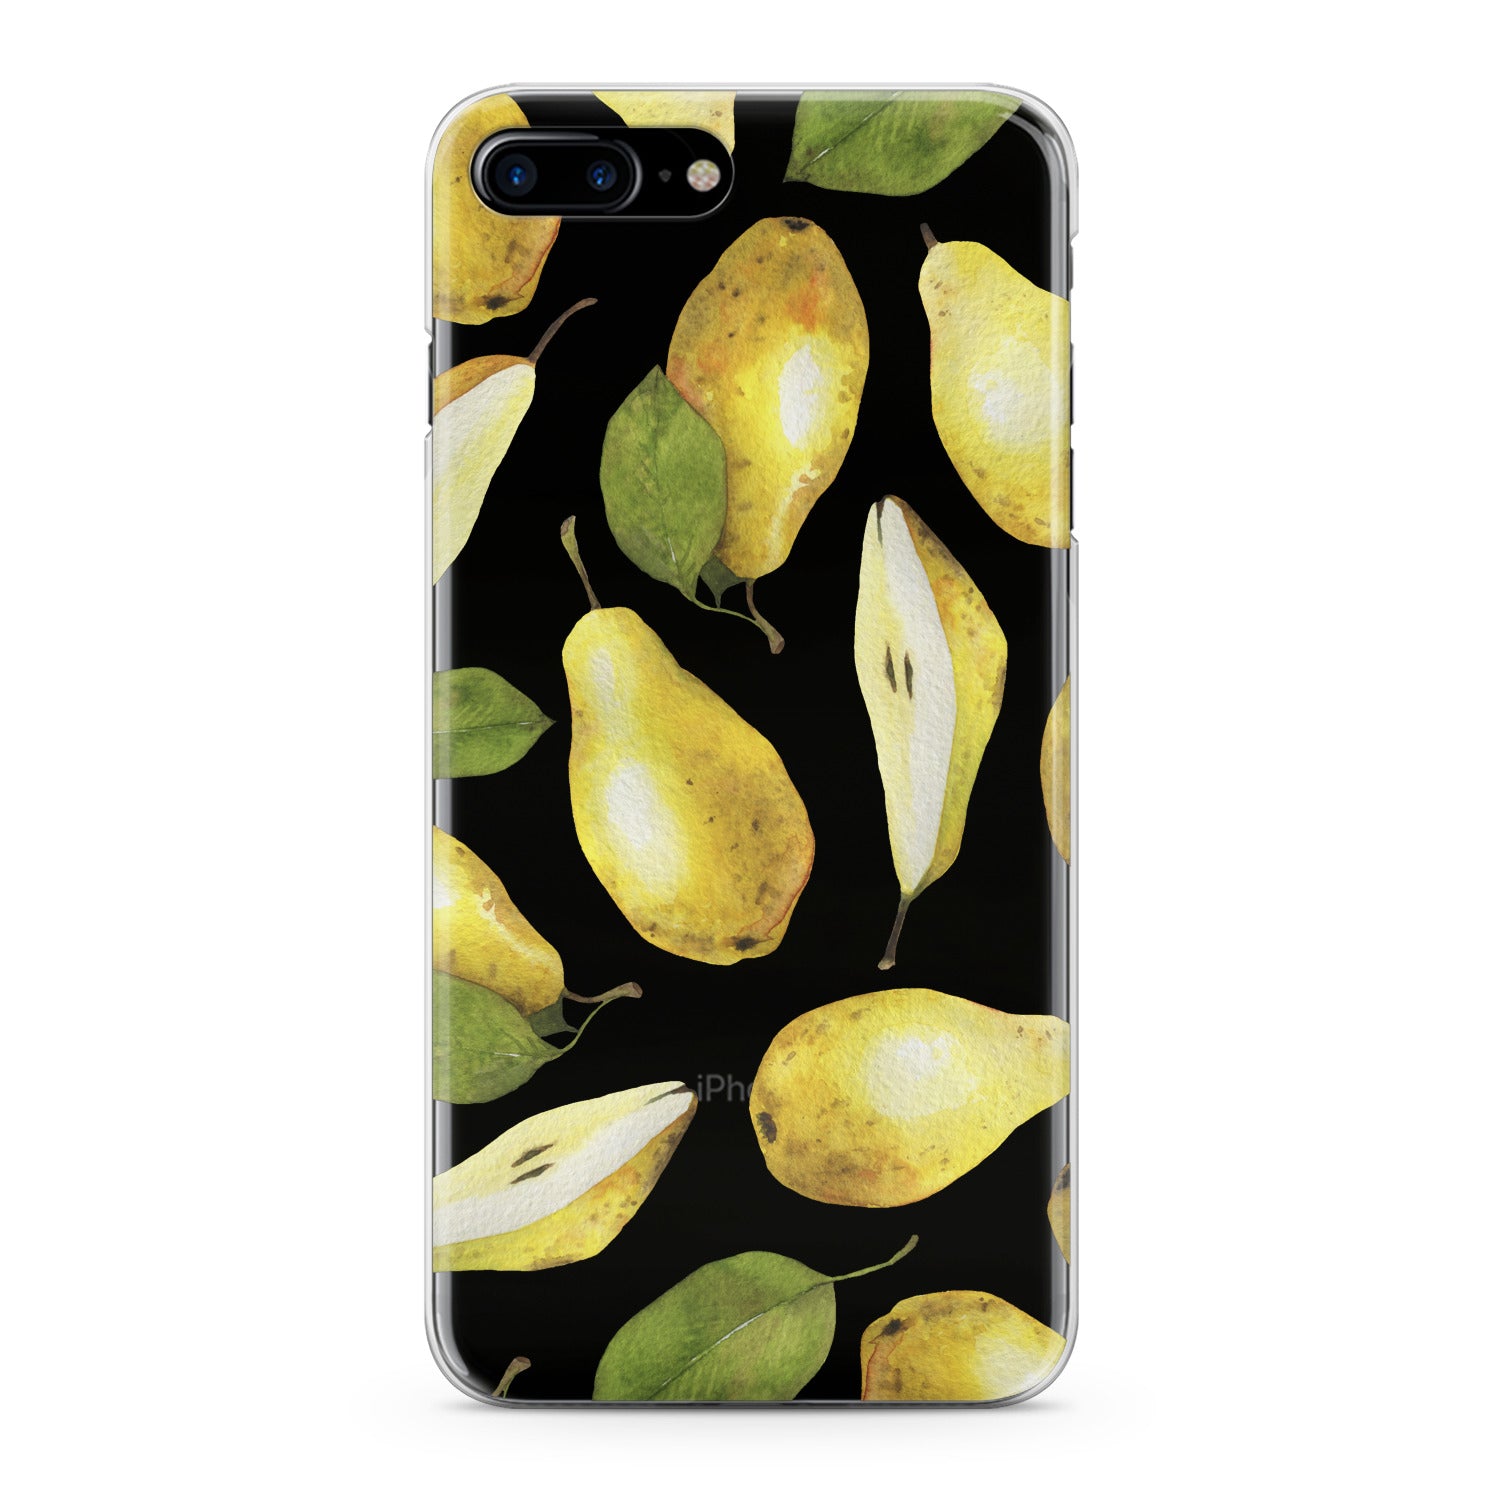 Lex Altern Pears Pattern Phone Case for your iPhone & Android phone.